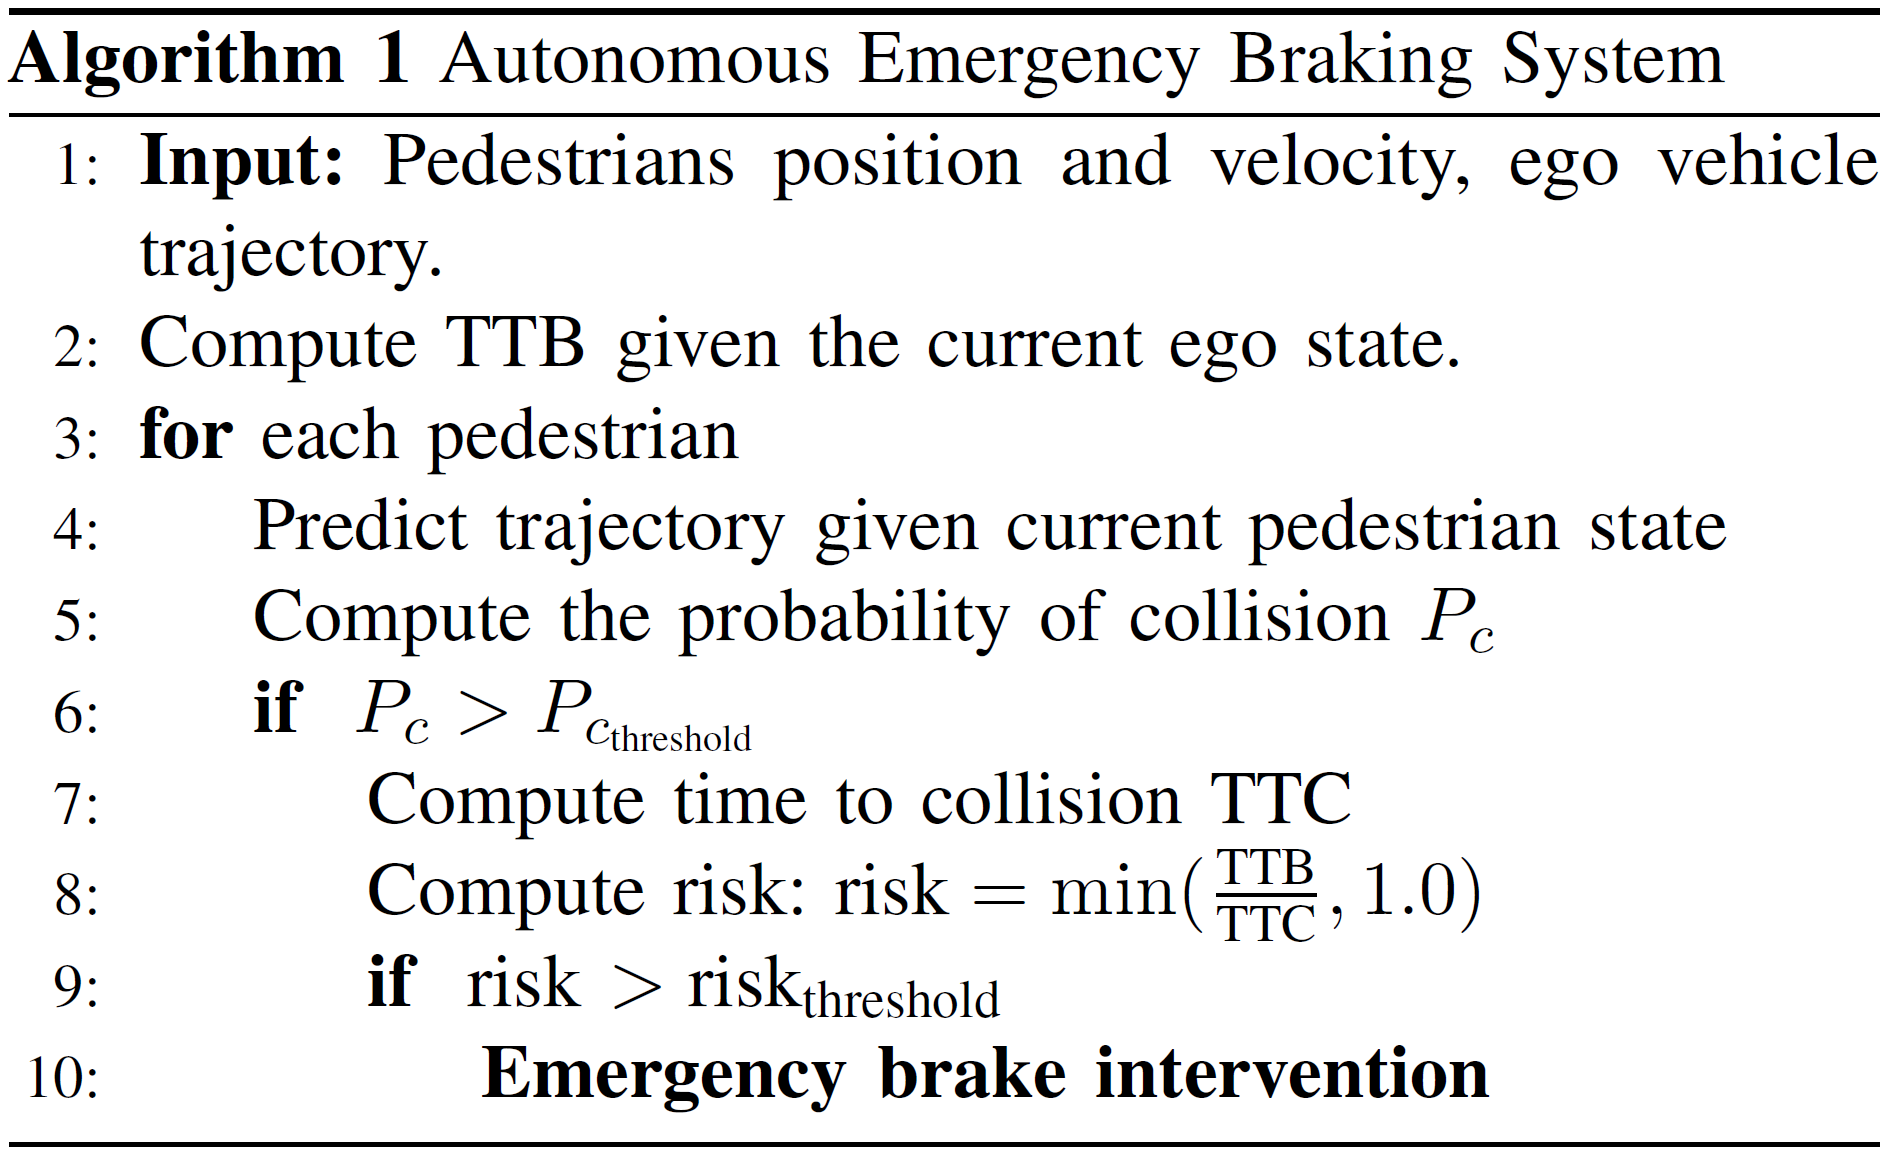 For each pedestrian, a probability of collision is computed from the time-to-brake TTB and the predicted position of the pedestrian. The difference between time to collision and time needed to stop is used to decide an emergency braking. Source: (Schratter et al. 2019).